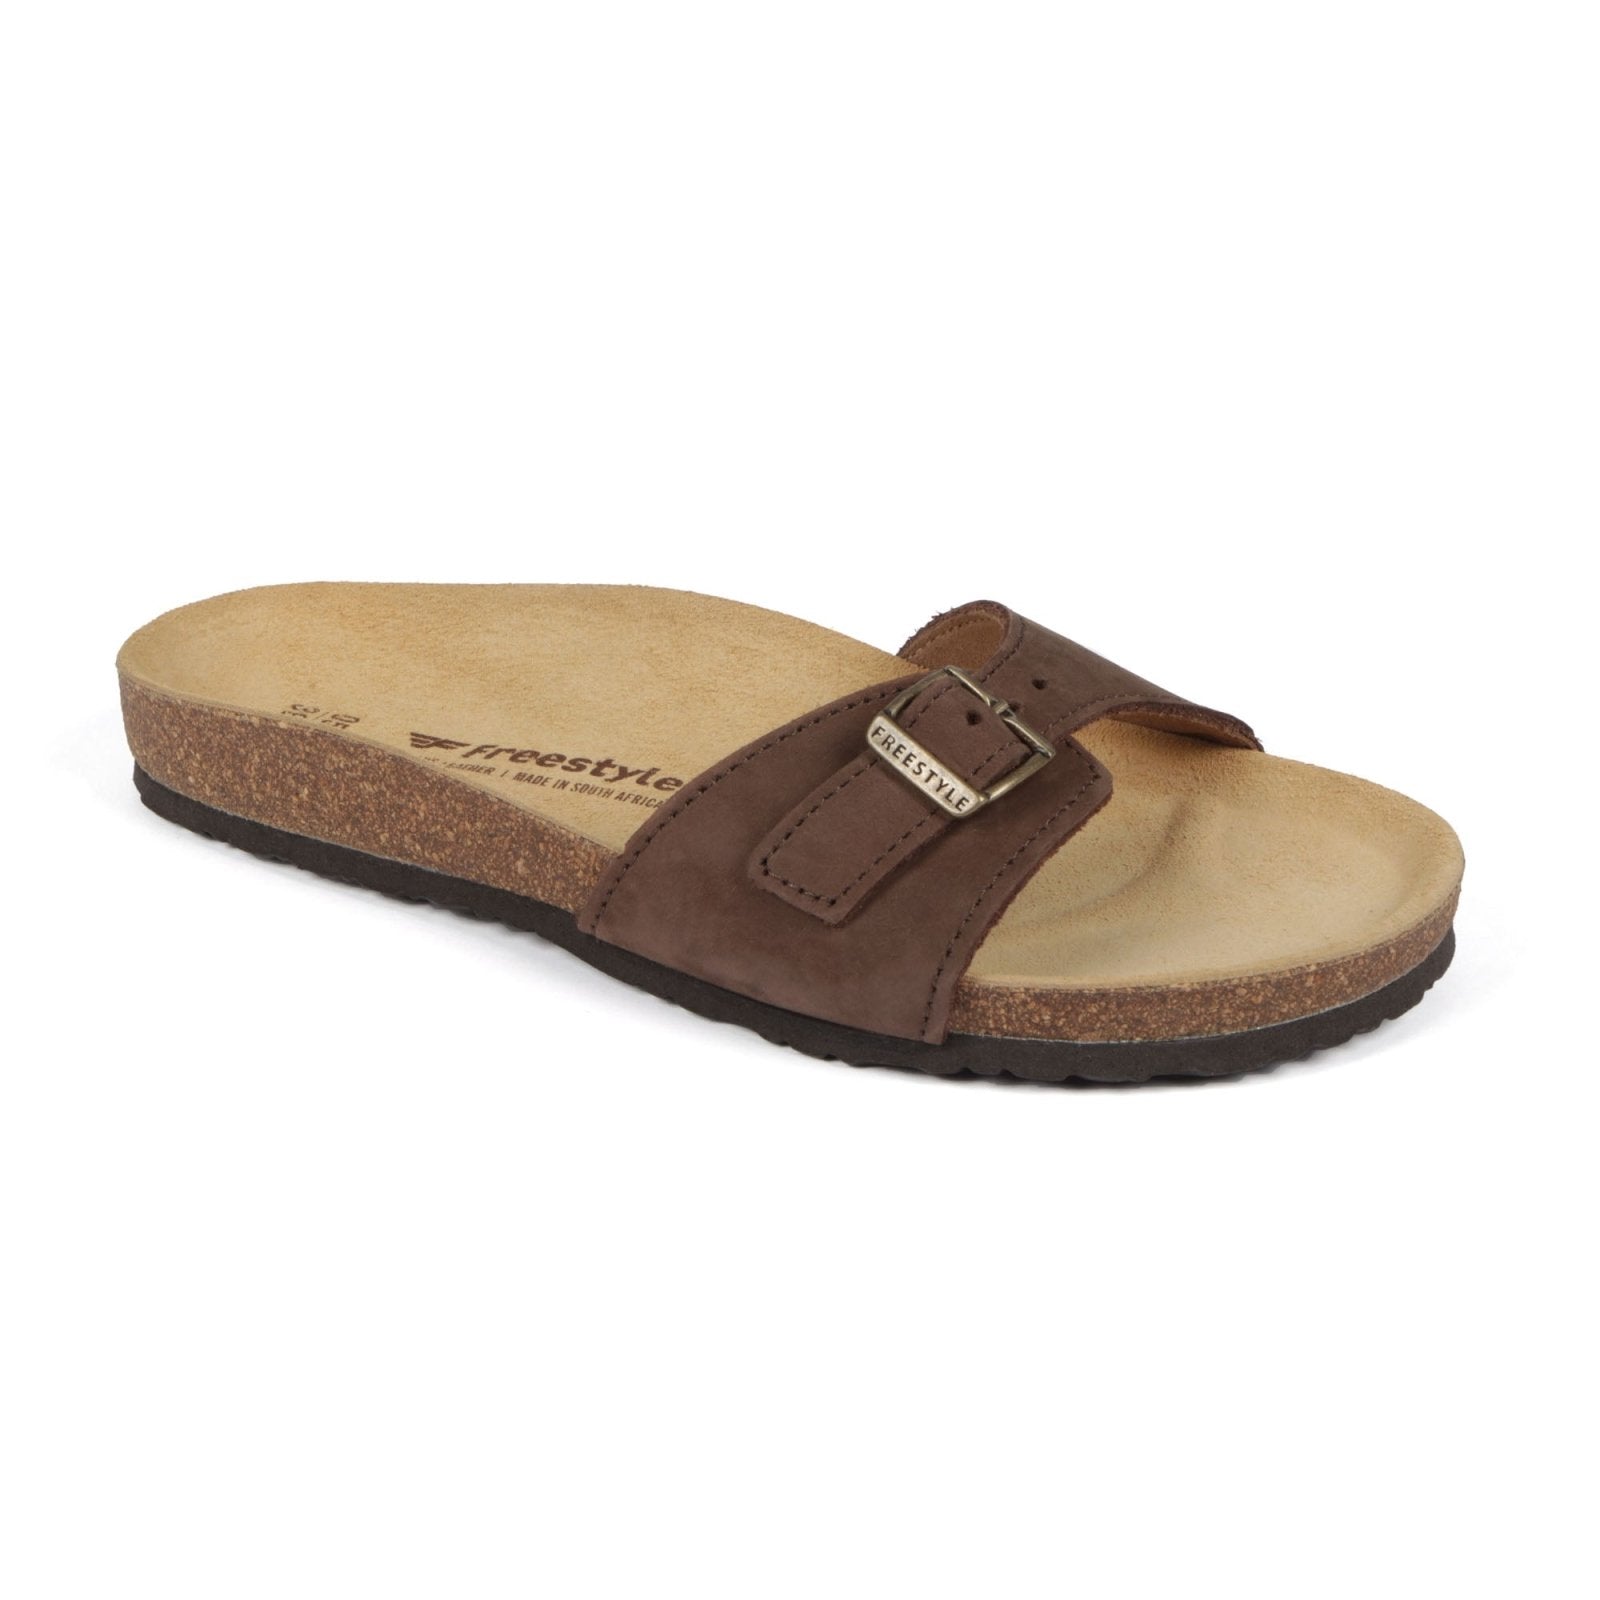 Corkies Frida Premium leather ladies sandal - Freestyle SA Proudly local Leather Goods Supplier leather boots veldskoens vellies leather shoes suede veldskoens